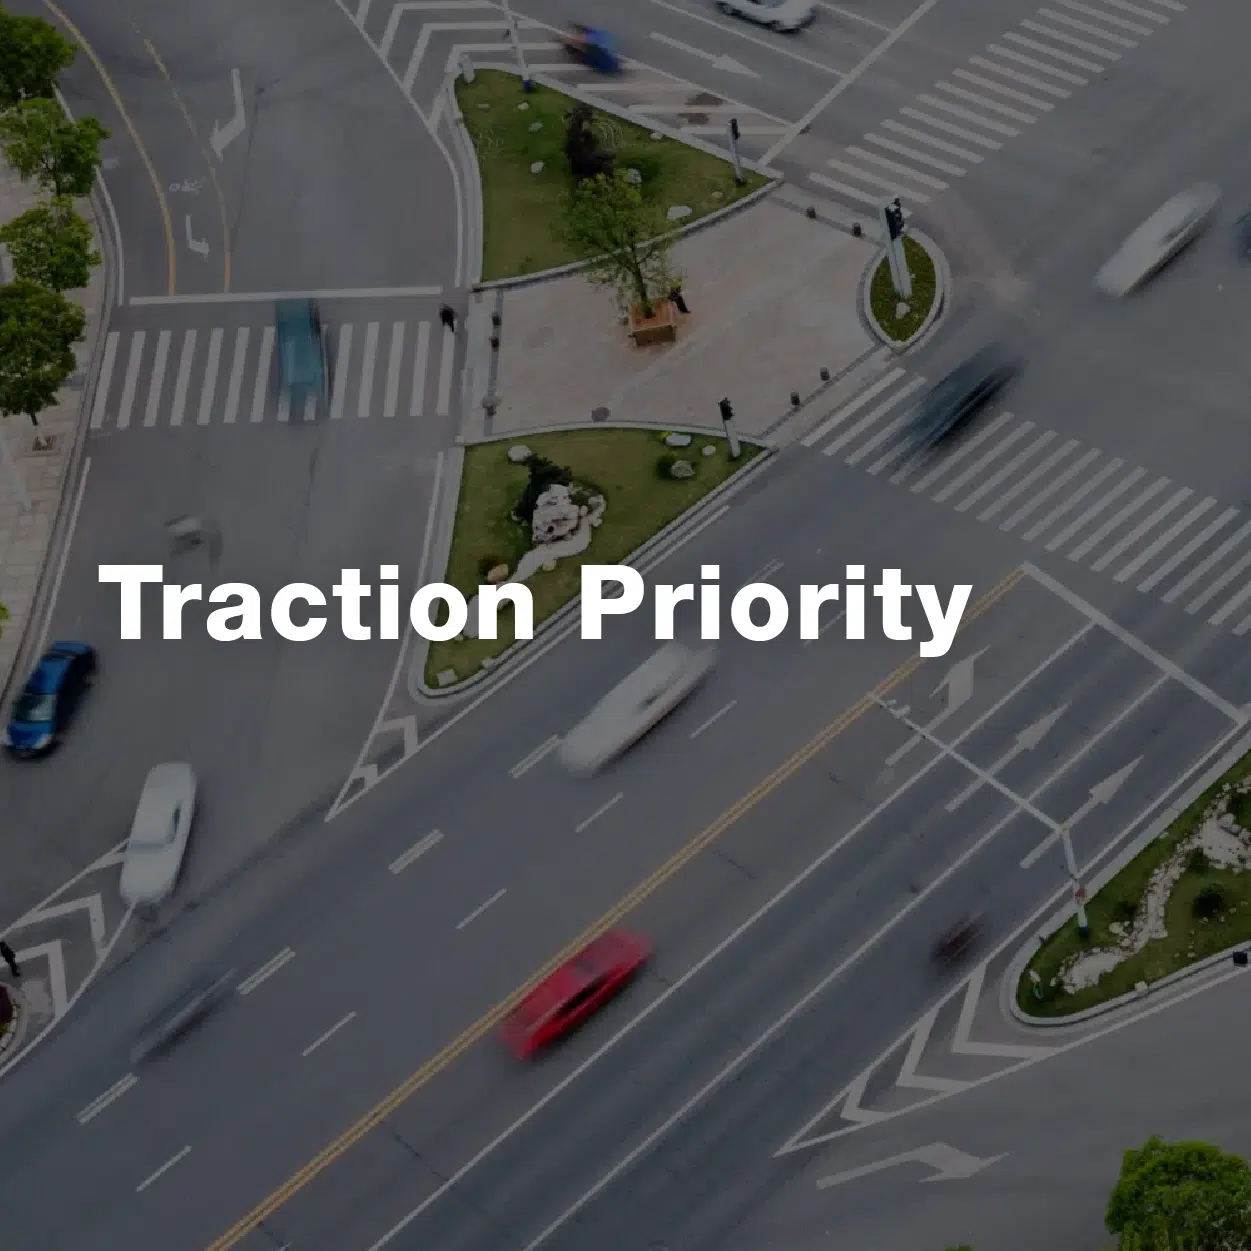 traction priority